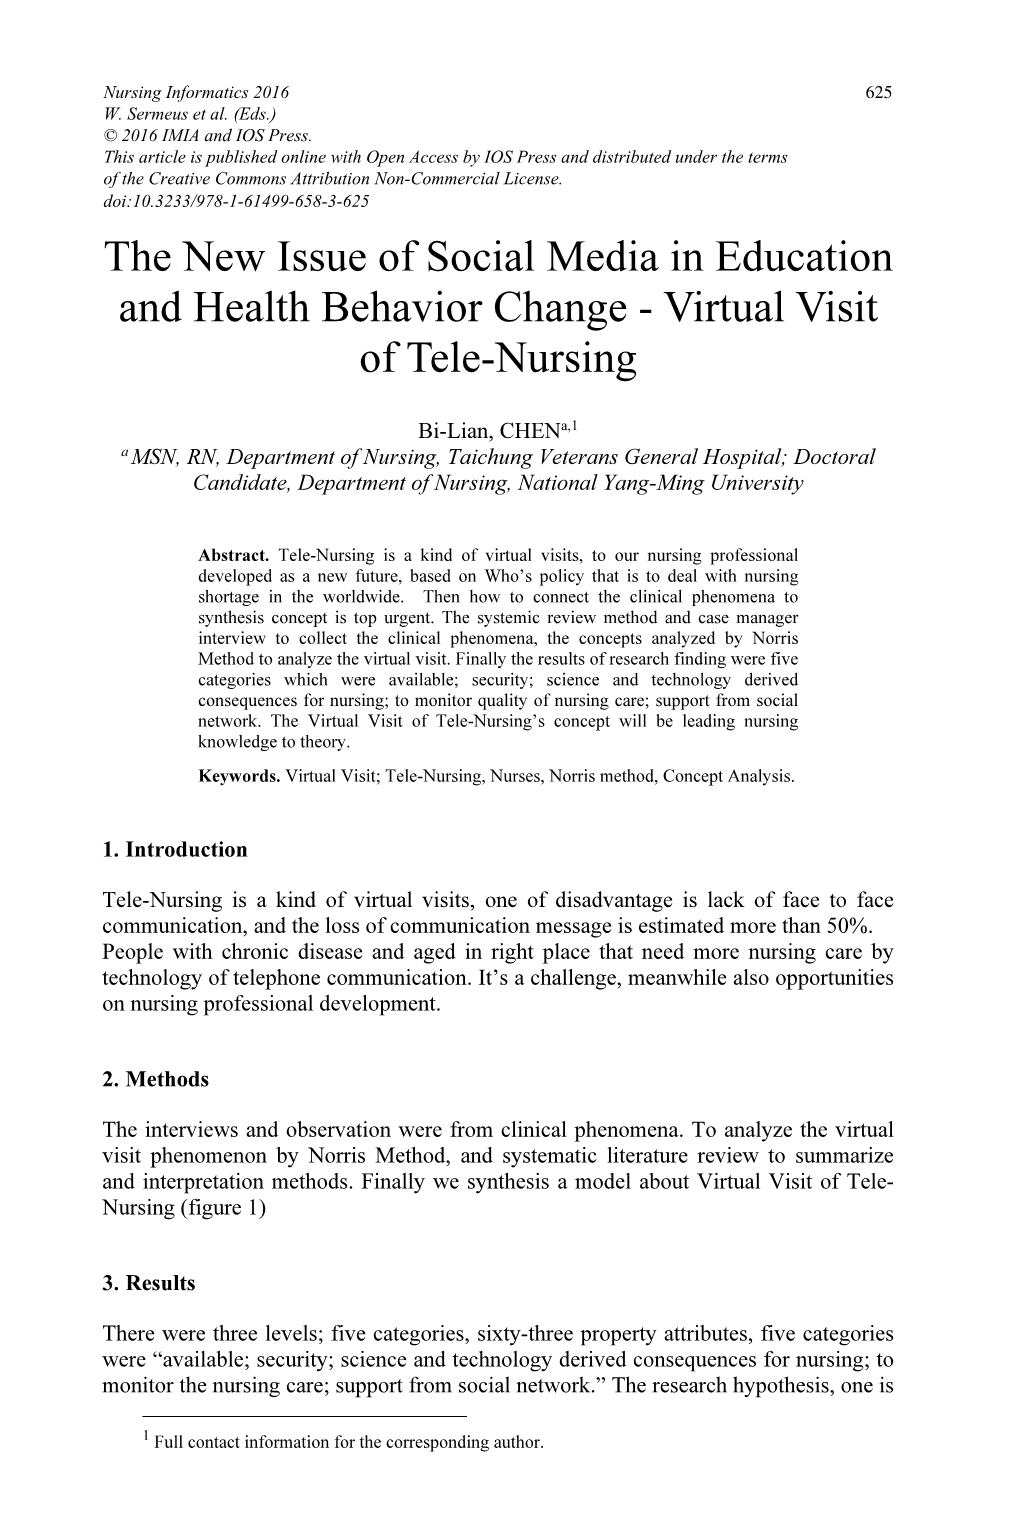 The New Issue of Social Media in Education and Health Behavior Change - Virtual Visit of Tele-Nursing